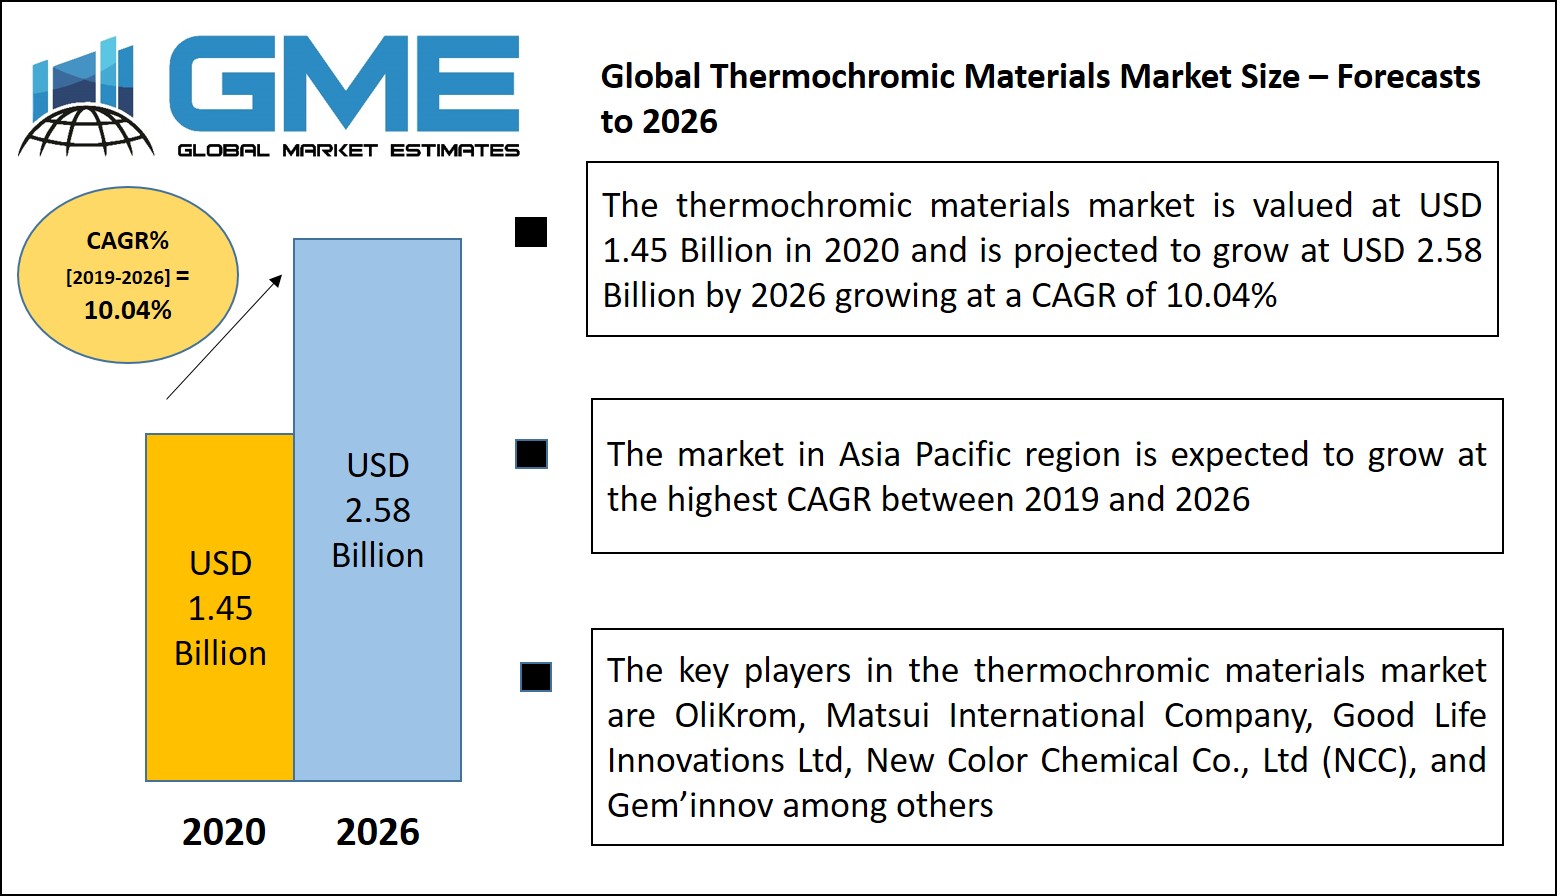 Global Thermochromic Materials Market